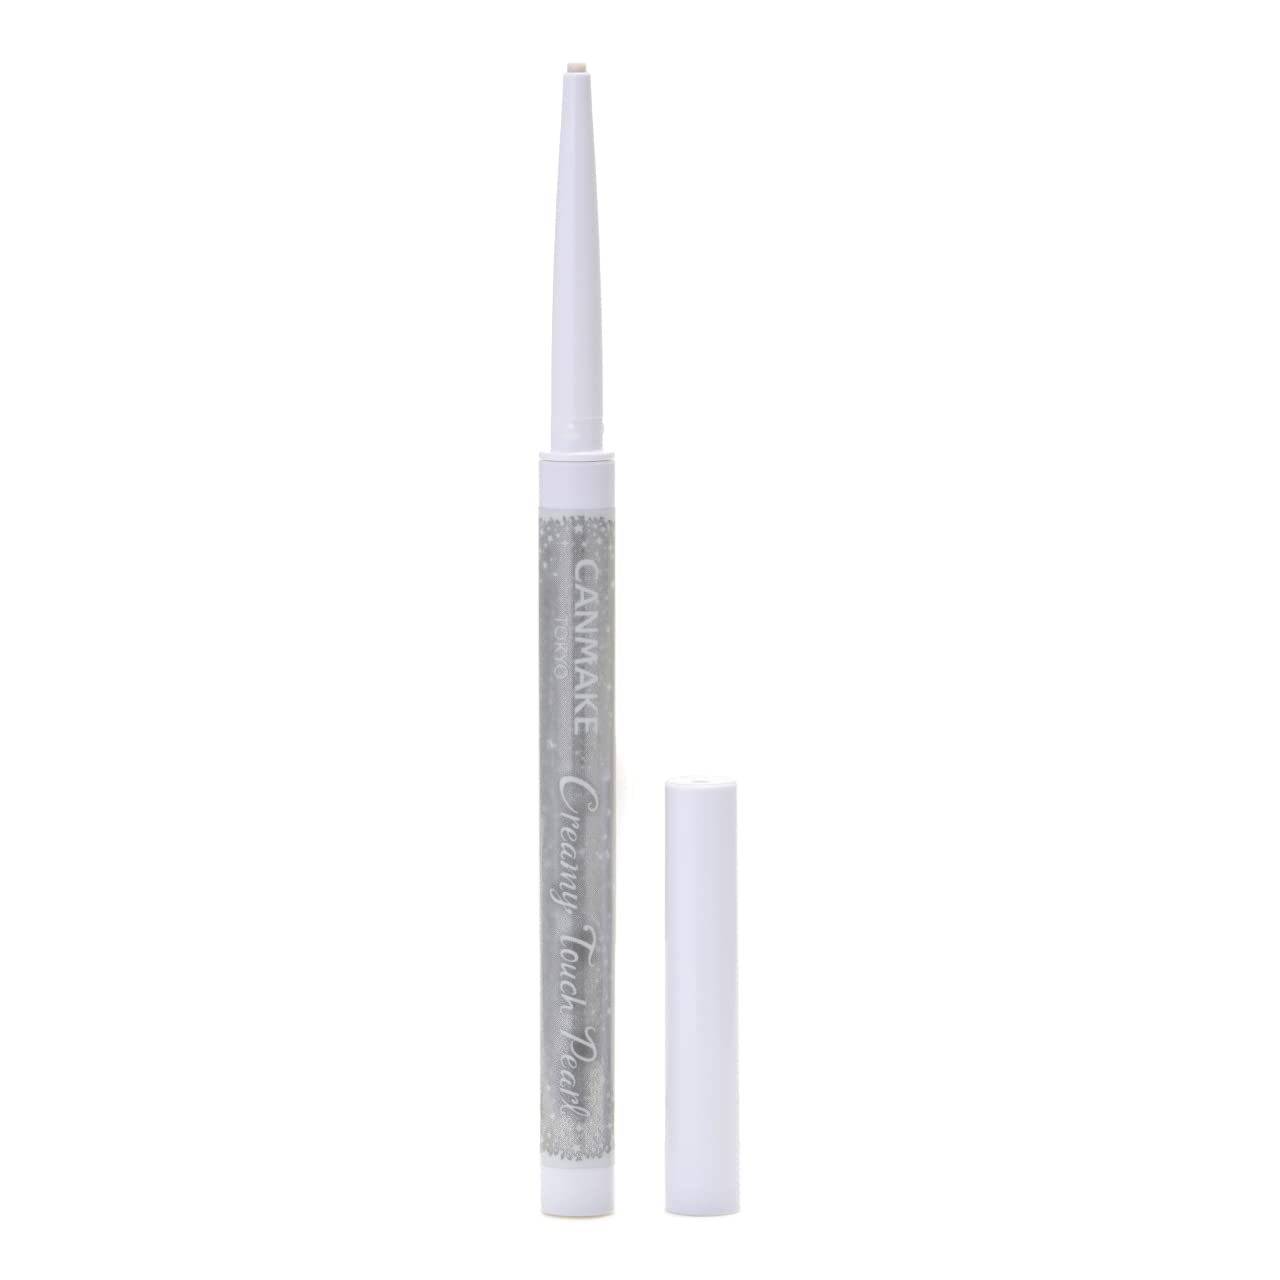 Canmake Creamy Touch Pearl 01 Bridal White Creamy Touch Liner Lame Tear Bag Lame Liner Waterproof